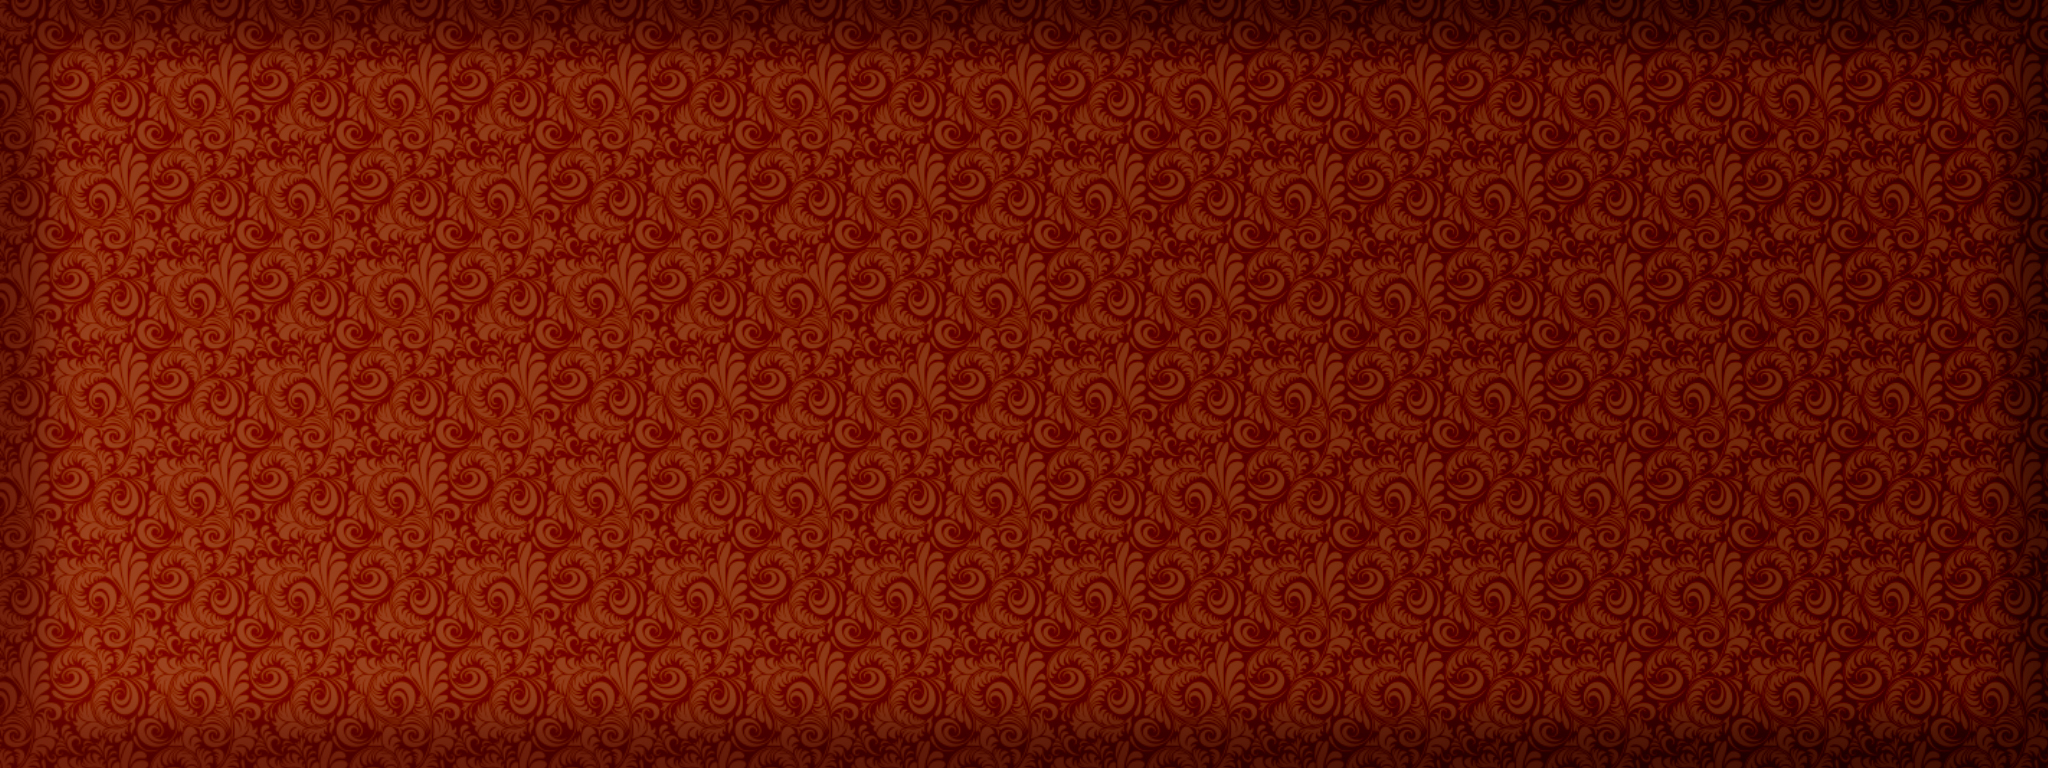 Victorian Wallpaper By Fewa1982 Customization Abstract Just